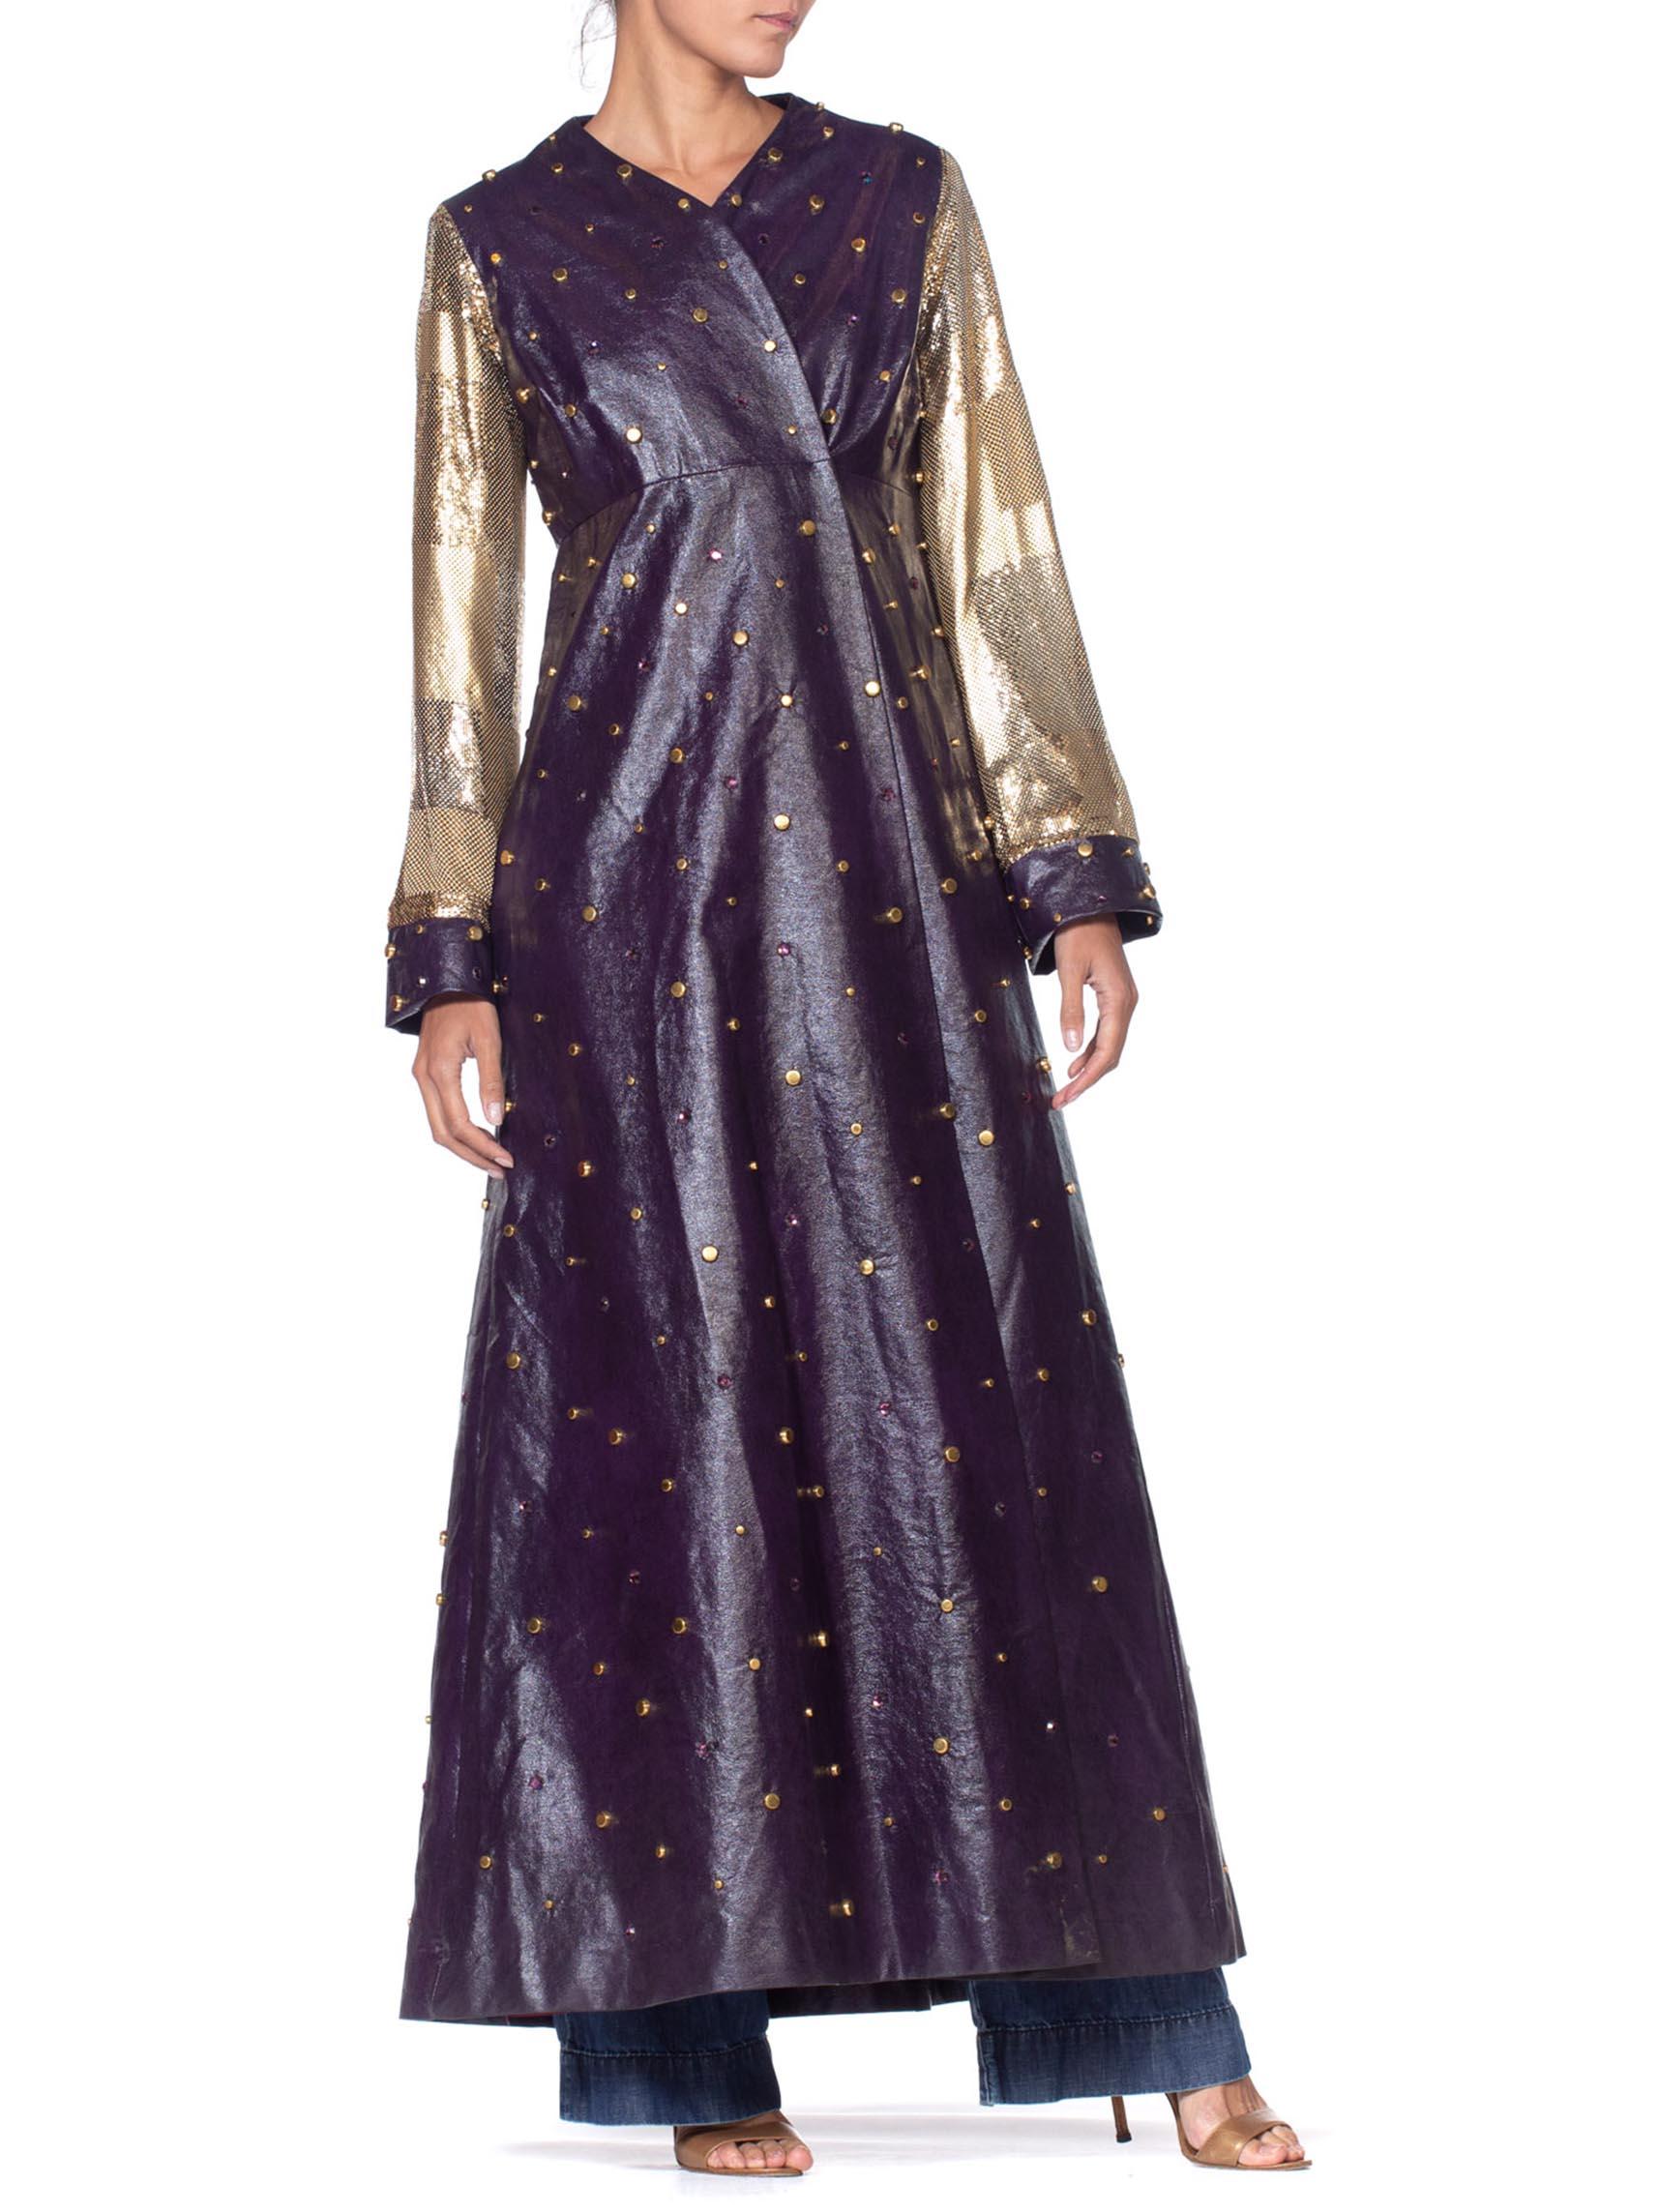 Morphew Collection 1970's Purple Vinyl Crystal Studded Coat With Gold Metal Mesh Sleeves